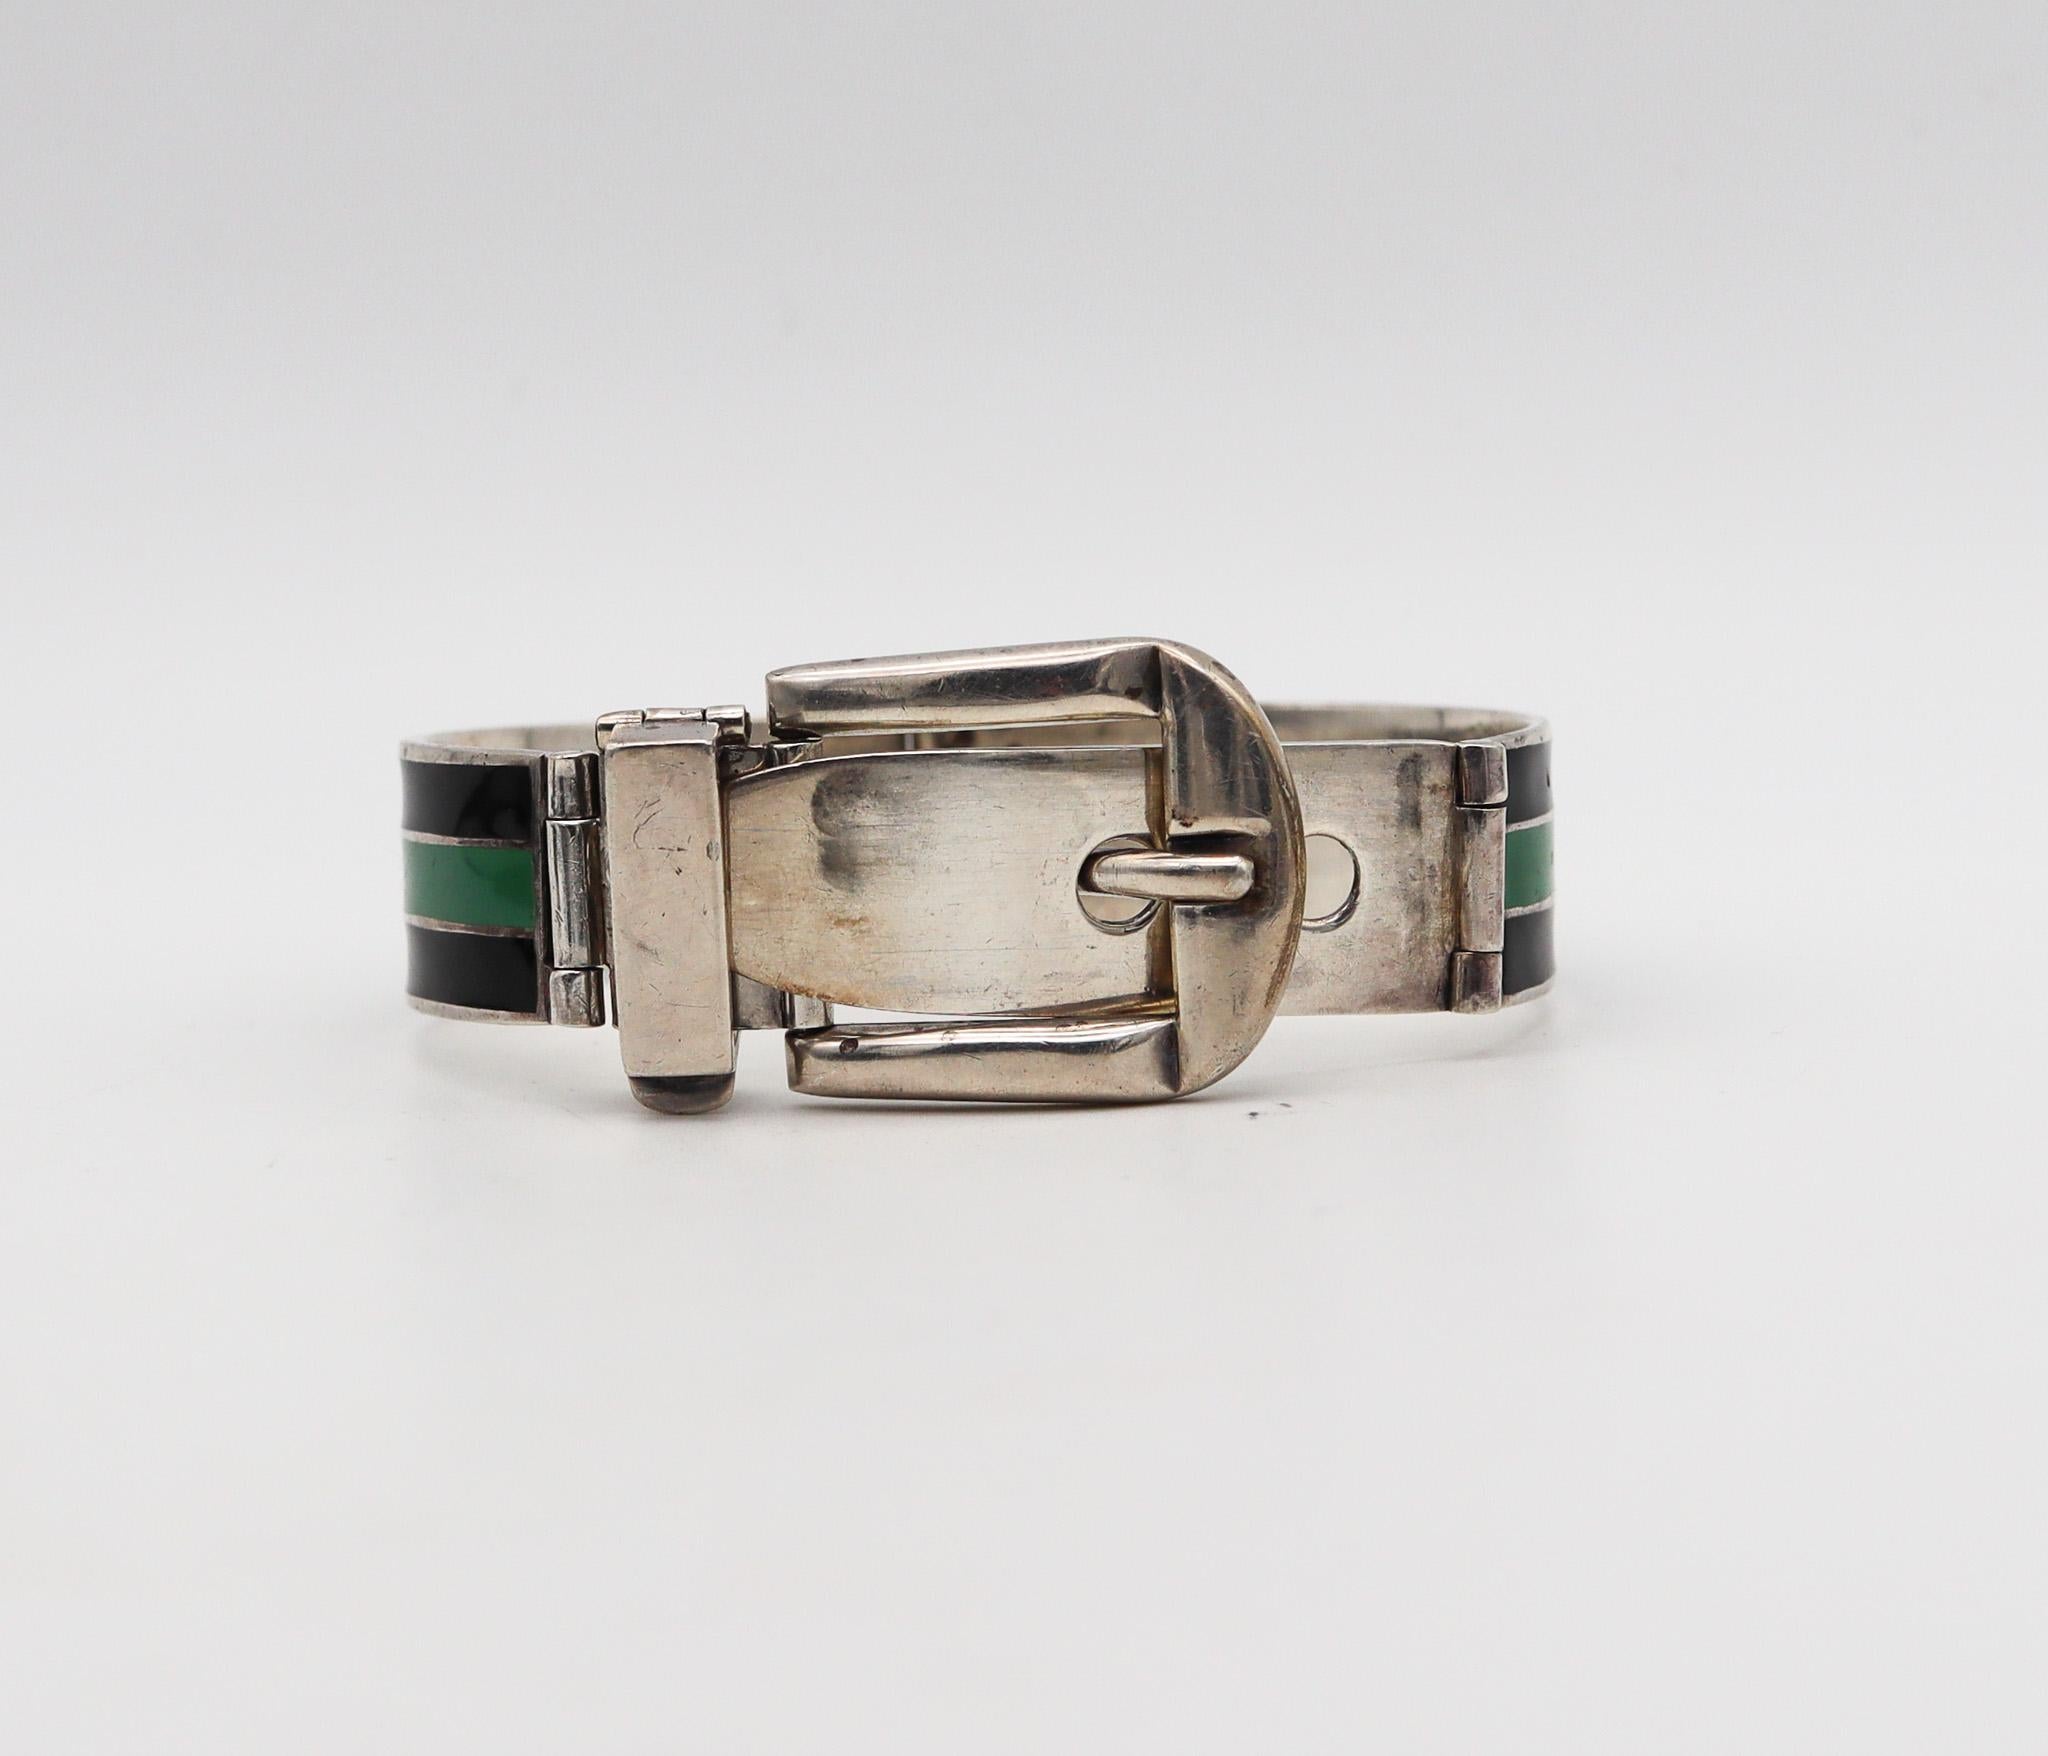 Enameled buckle bracelet designed by Gucci.

A rare vintage buckle bracelet, created in Italy by the fashion house of Gucci back in the 1970. This iconic bracelet was crafted in the shape of a buckle in solid .925/.999 sterling silver and is